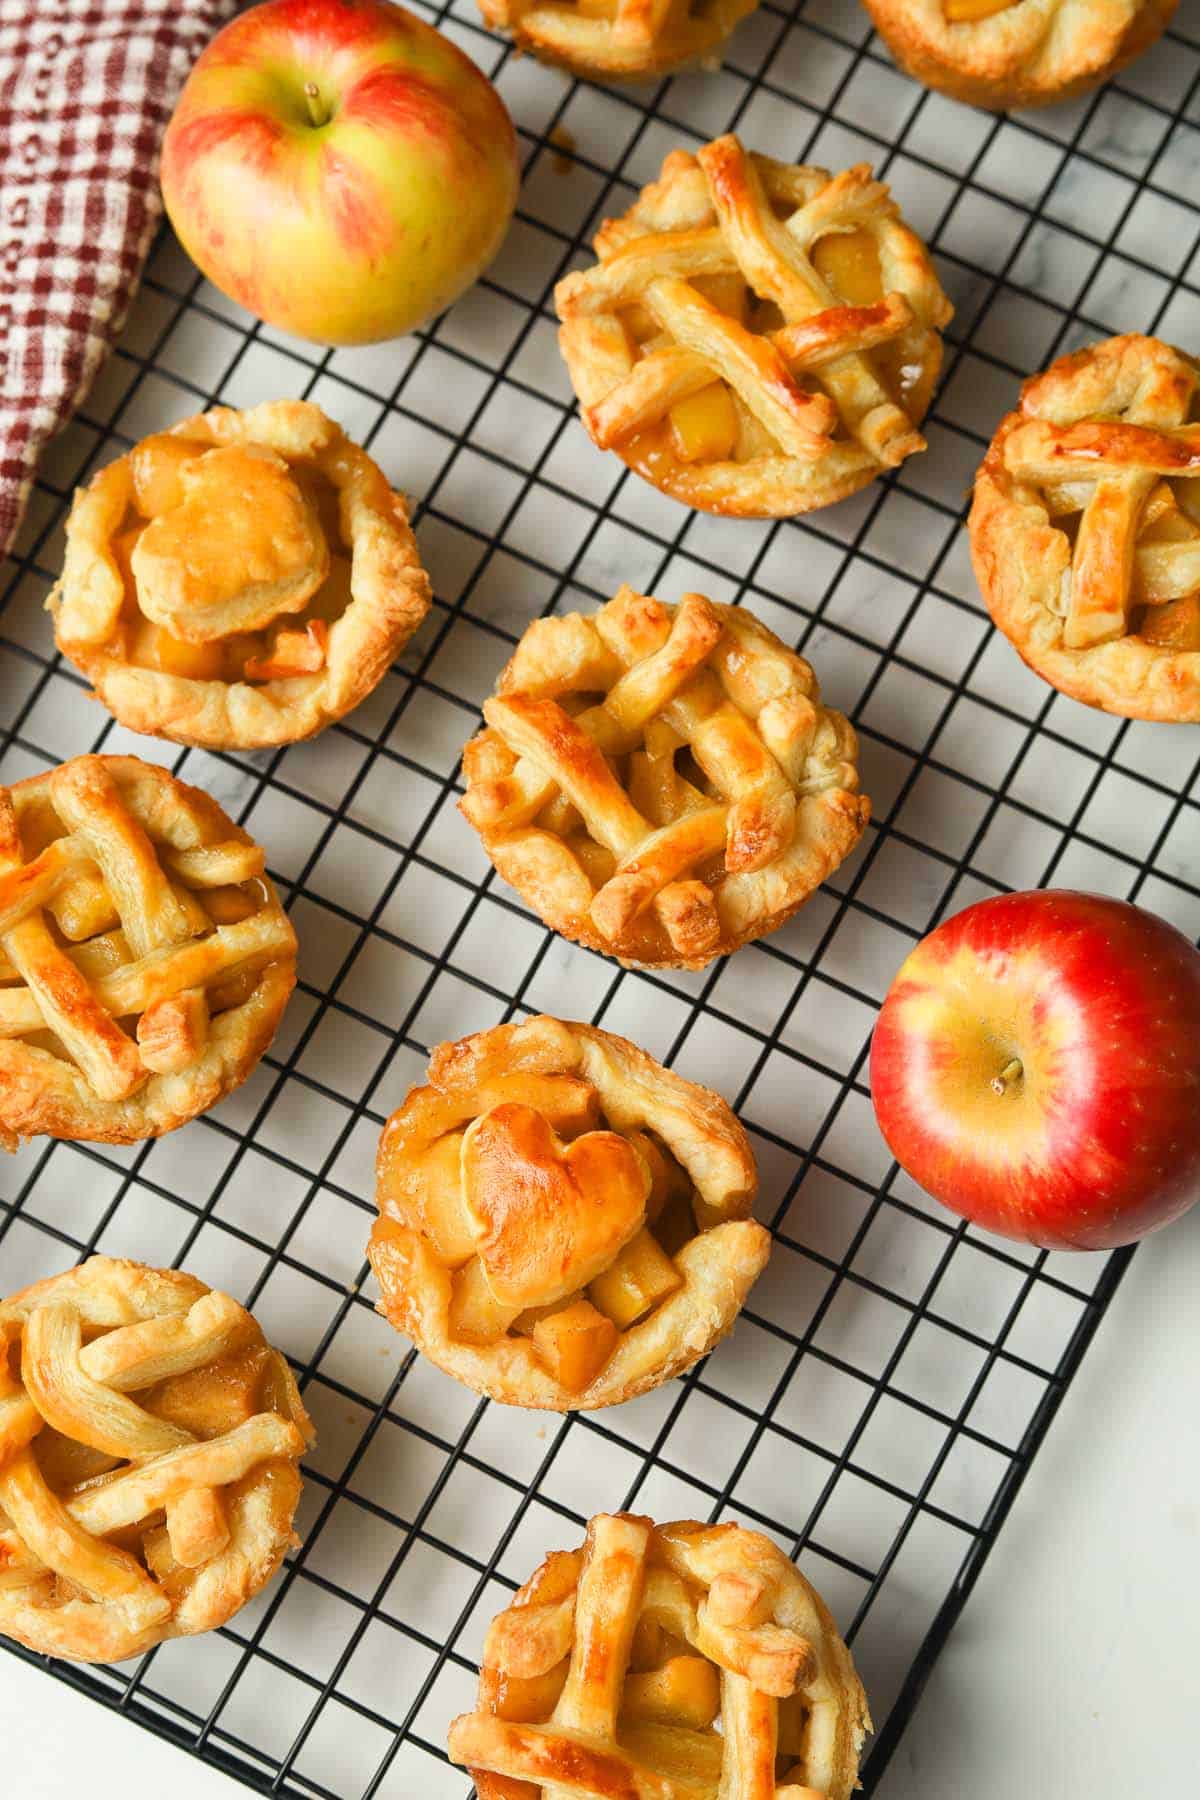 Mini apple pies and red apples on cooling rack.